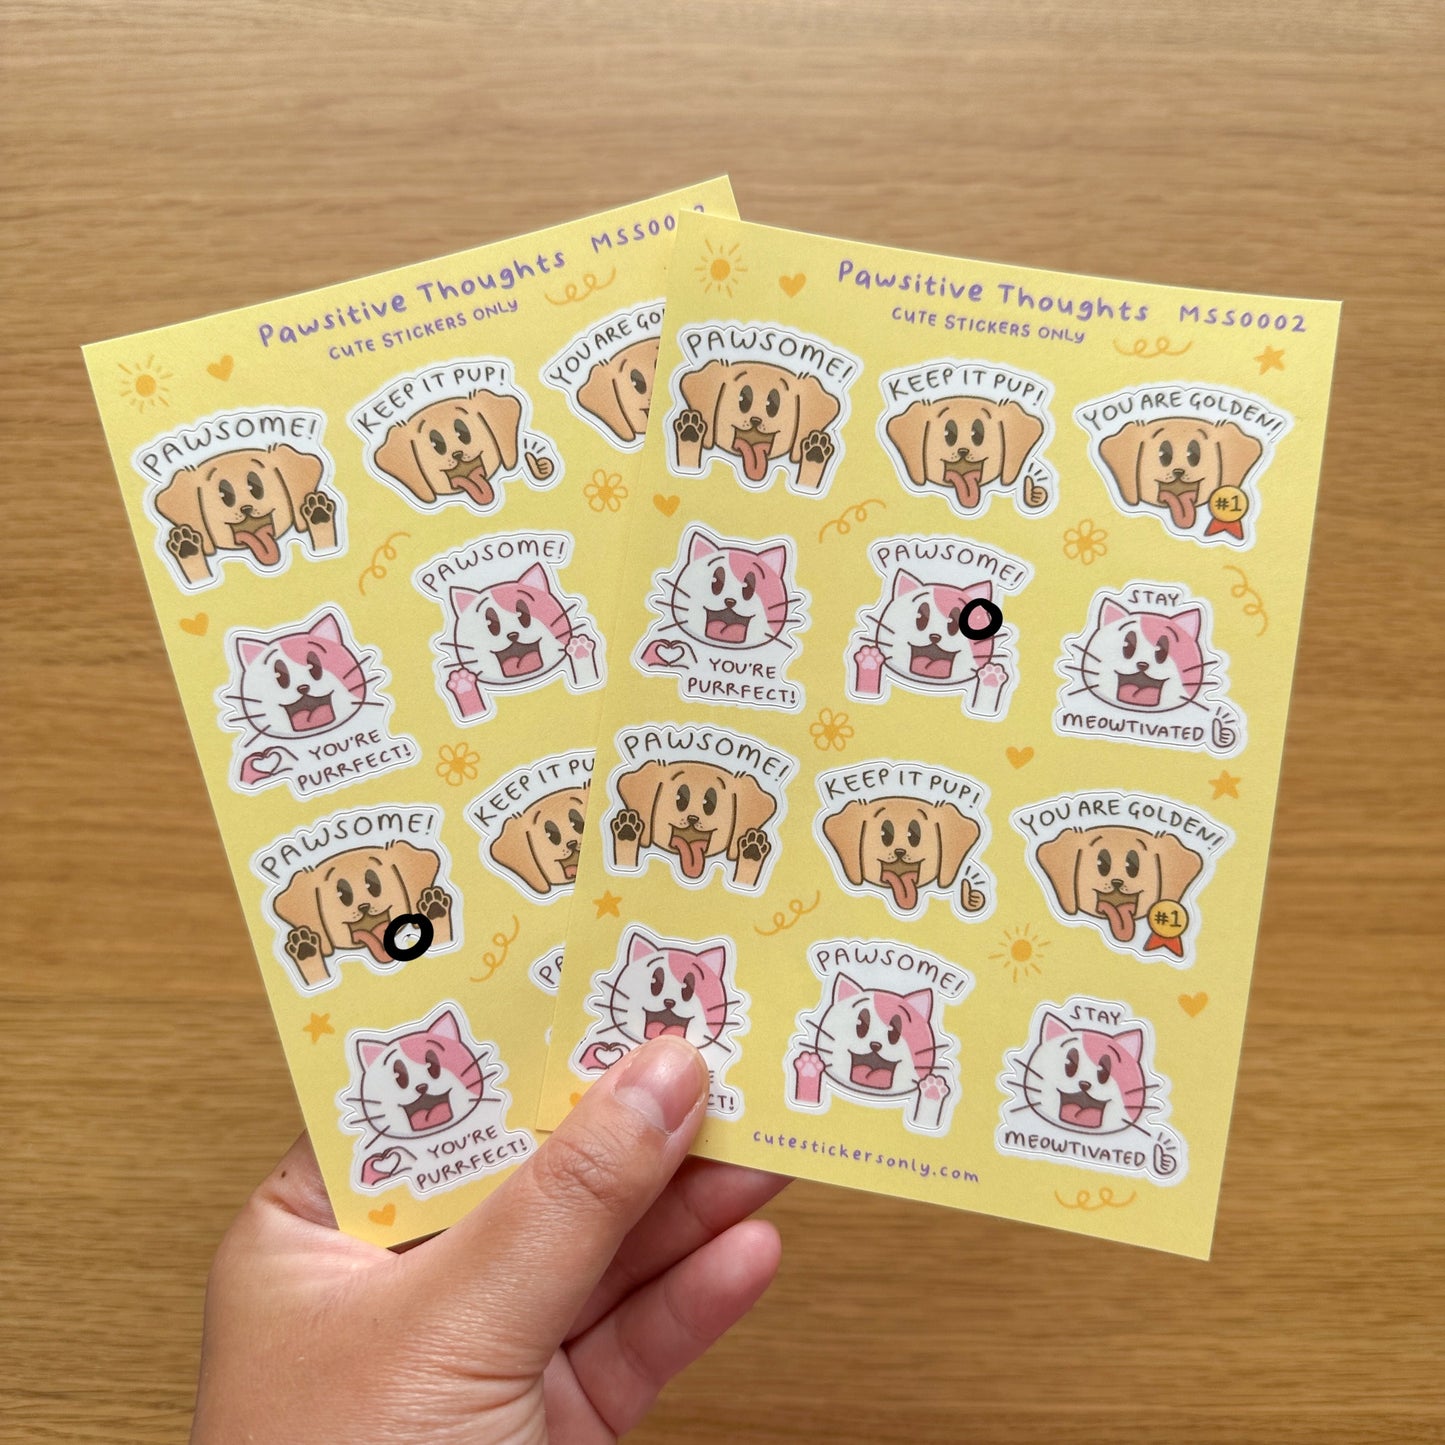 Pawsitive Thoughts - Joey and Cake Premium Sticker Sheet